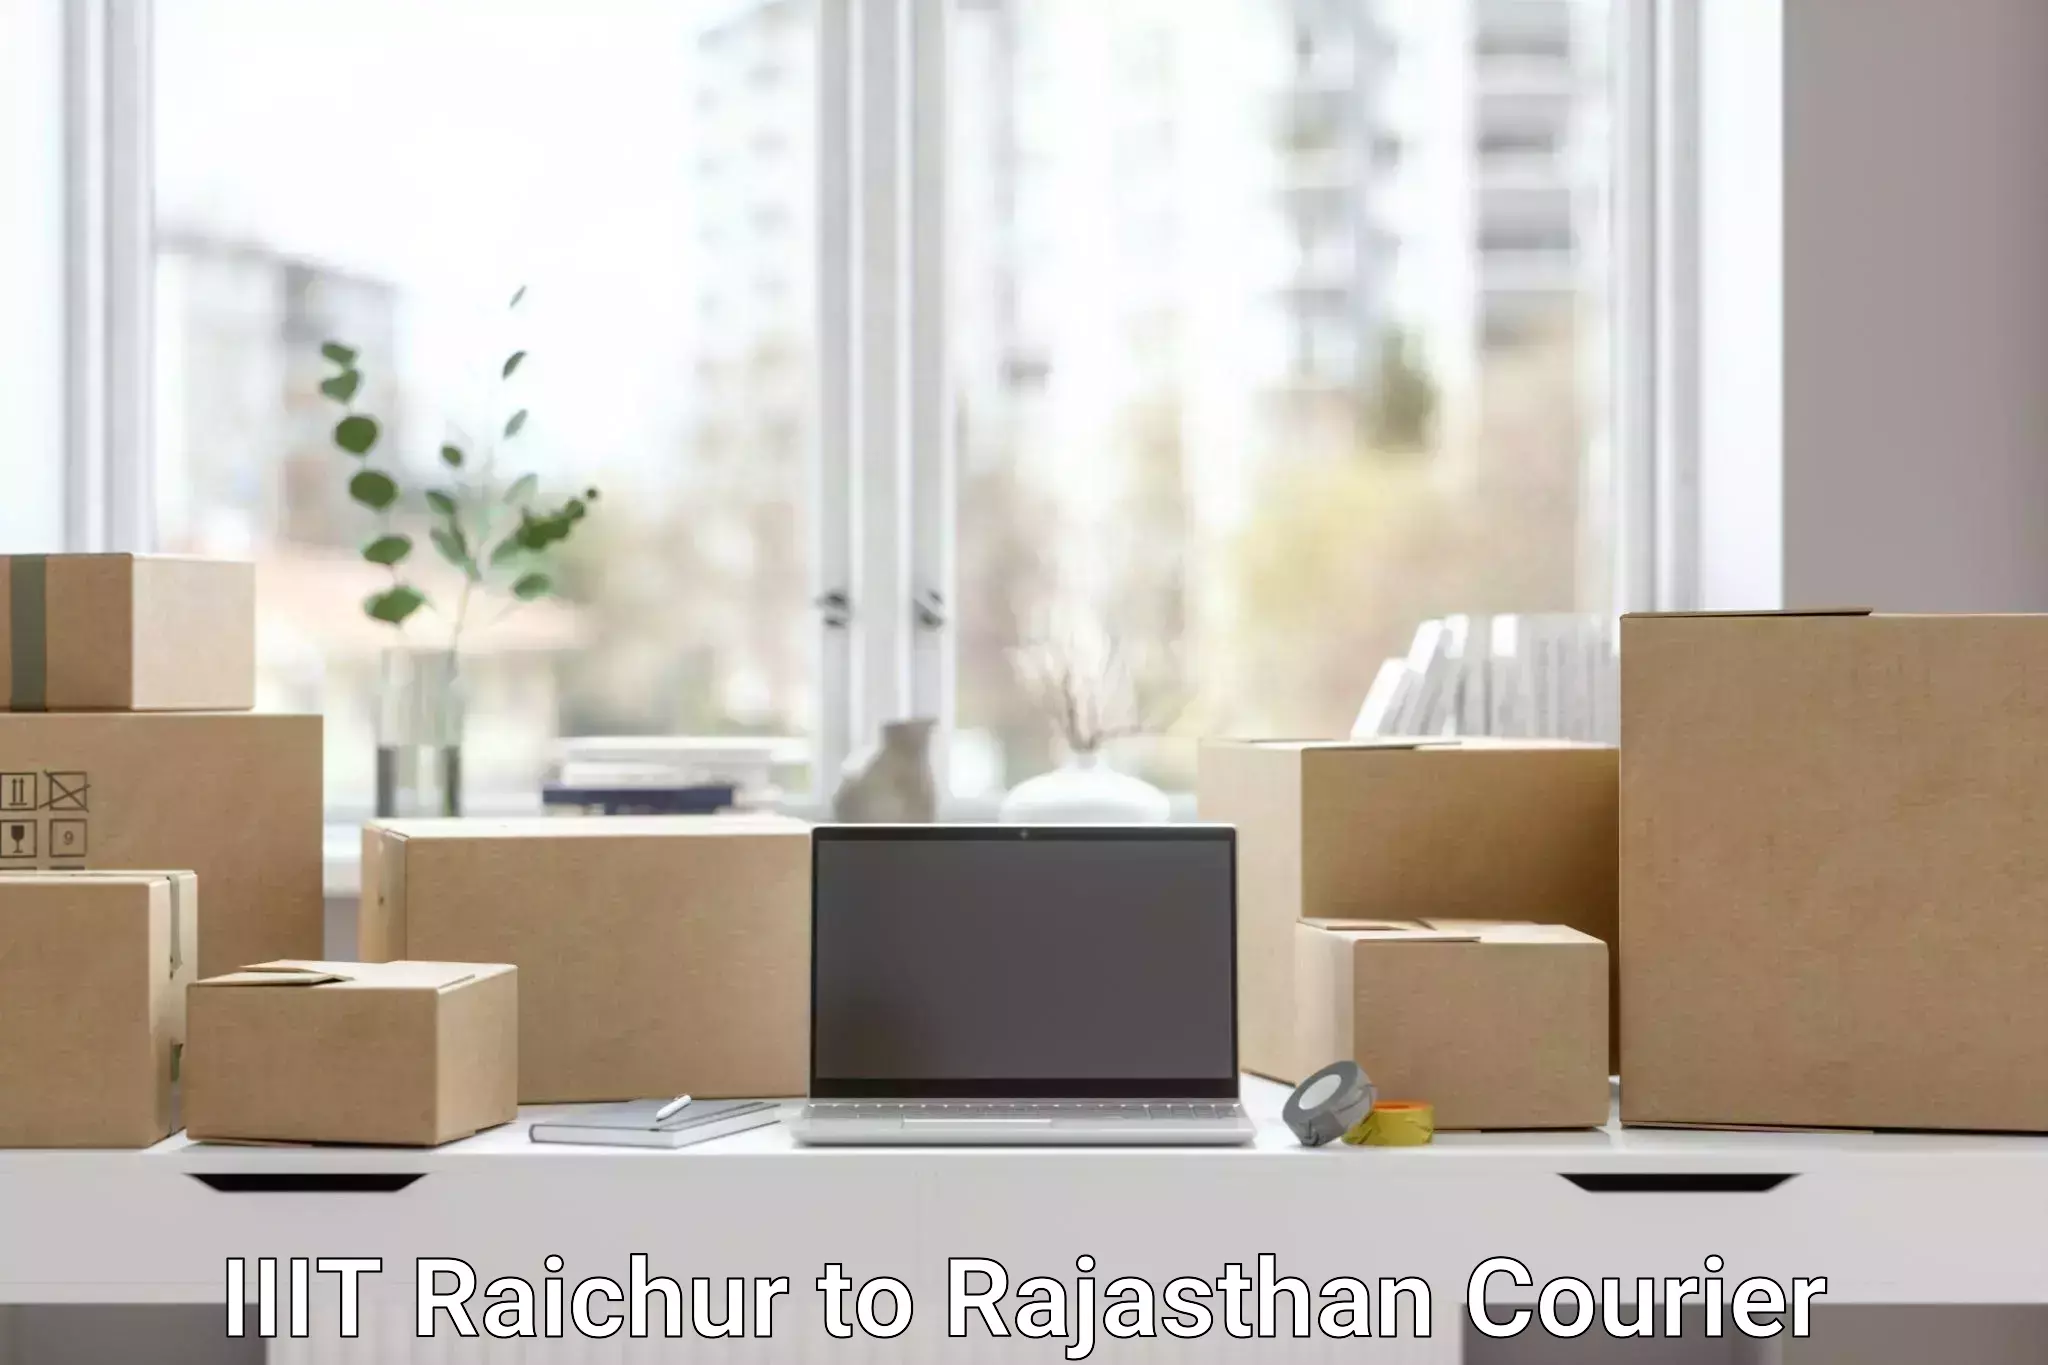 Small business couriers IIIT Raichur to Anupgarh